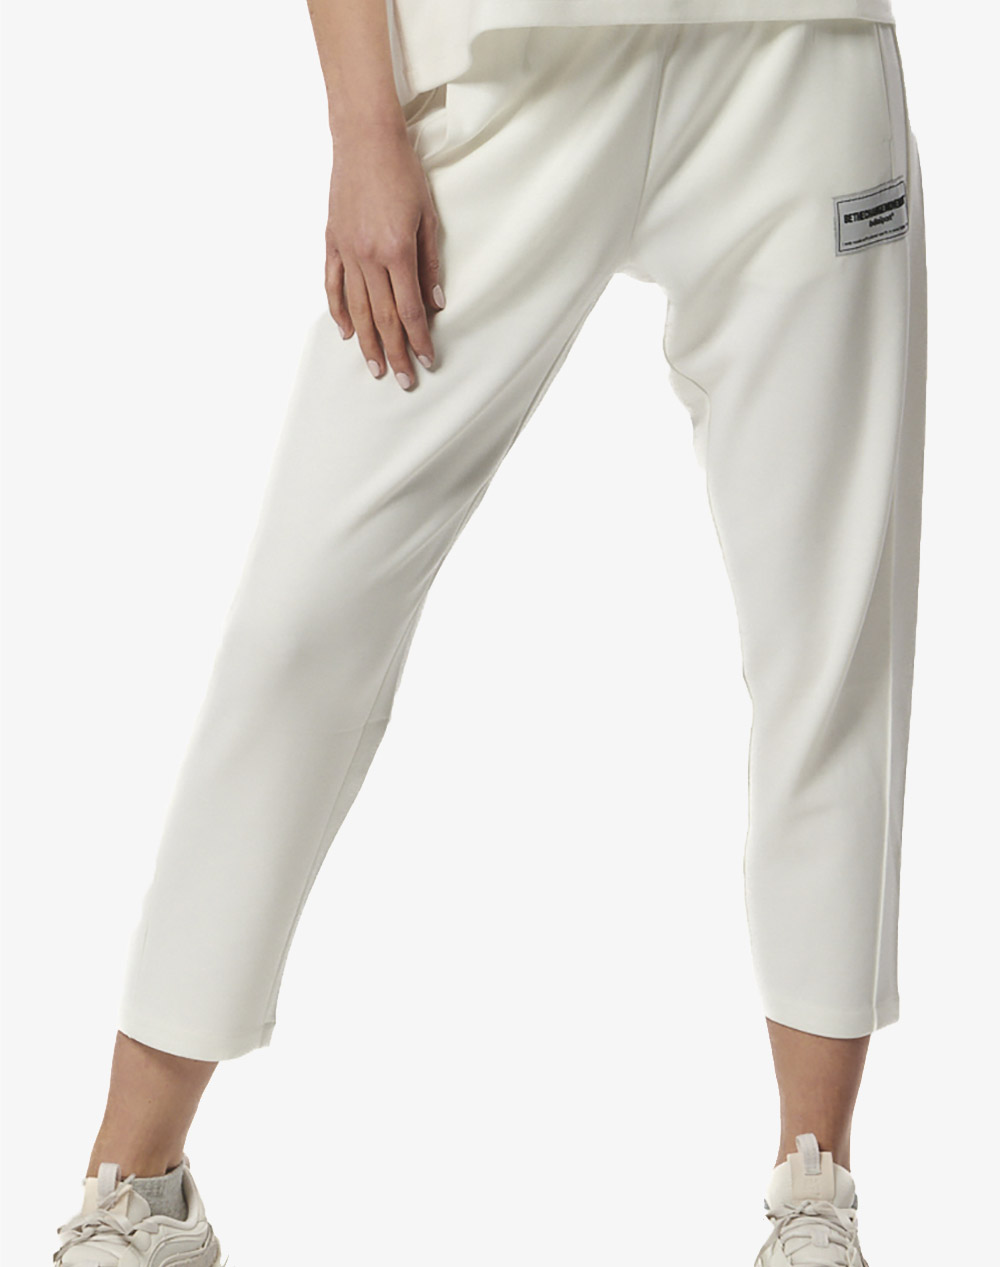 BODY ACTION WOMEN”S TECH FLEECE CROPPED TRACK PANTS 021433-01-STAR WHITE OffWhite